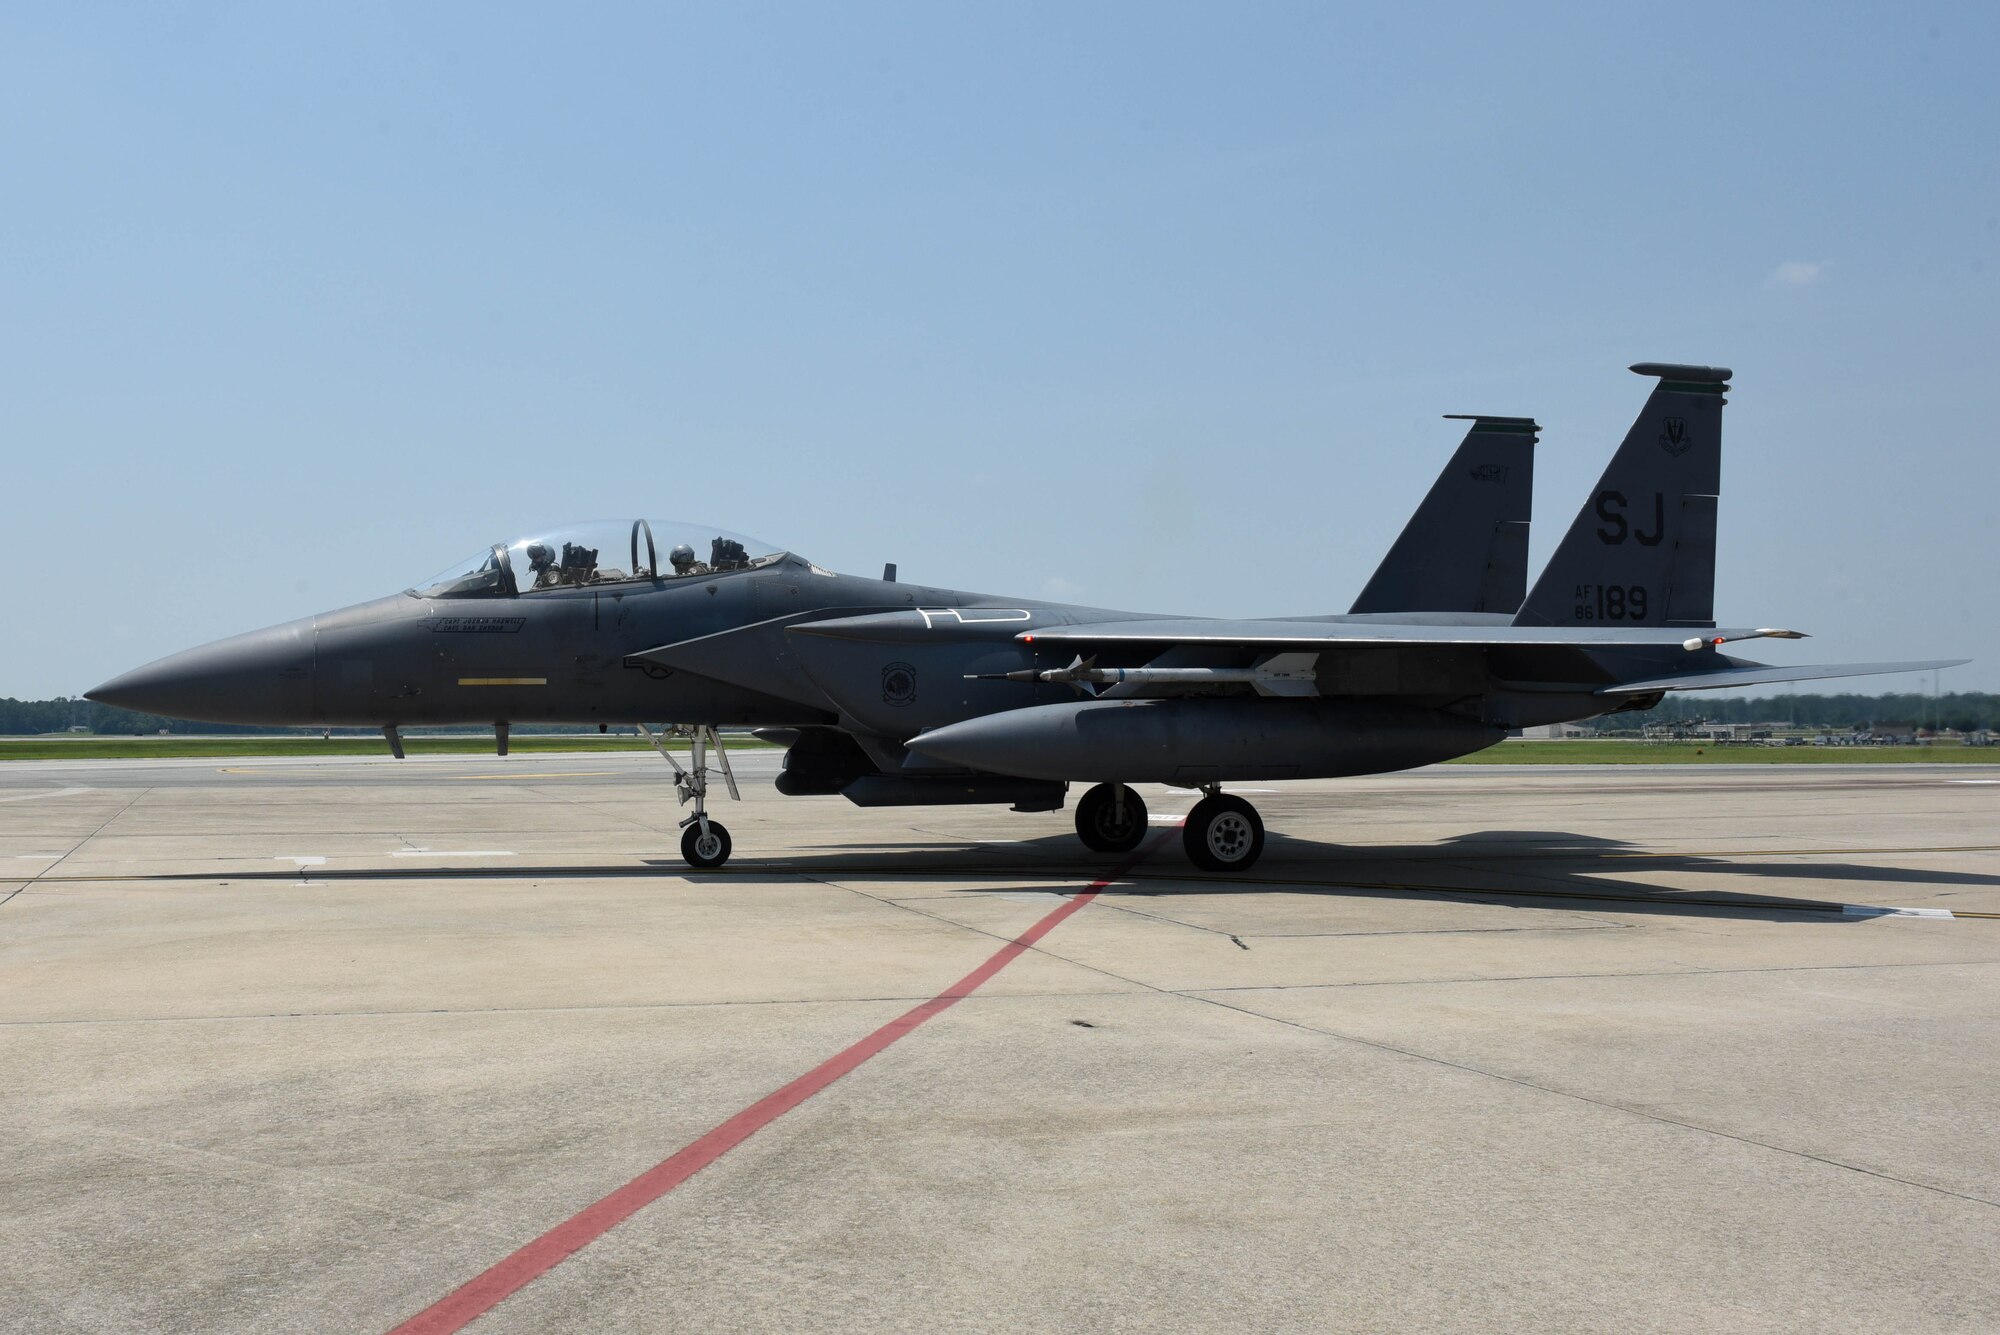 An F-15E Strike Eagle taxis to the end of the runway for take-off, July 21, 2017, at Seymour Johnson Air Force Base, North Carolina.